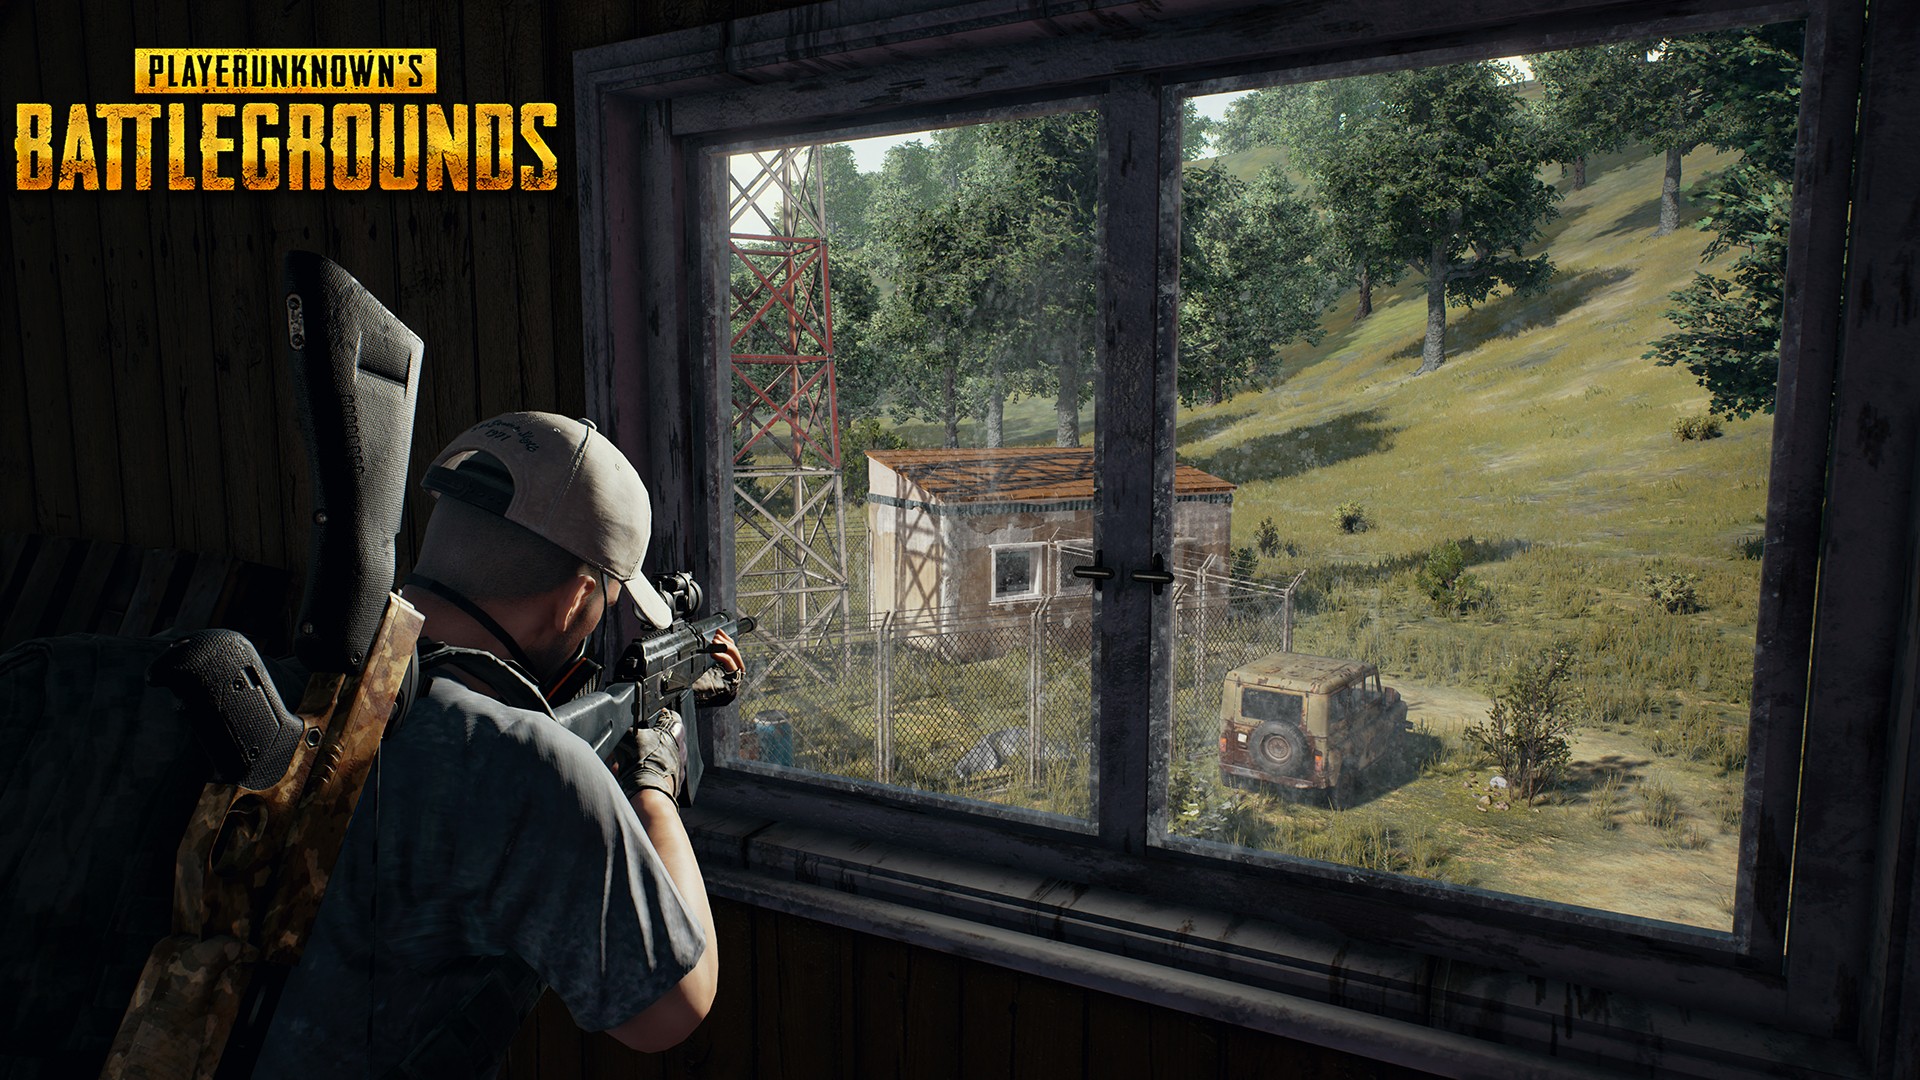 Wallpaper PUBG Xbox One with image resolution 1920x1080 pixel. You can use this wallpaper as background for your desktop Computer Screensavers, Android or iPhone smartphones